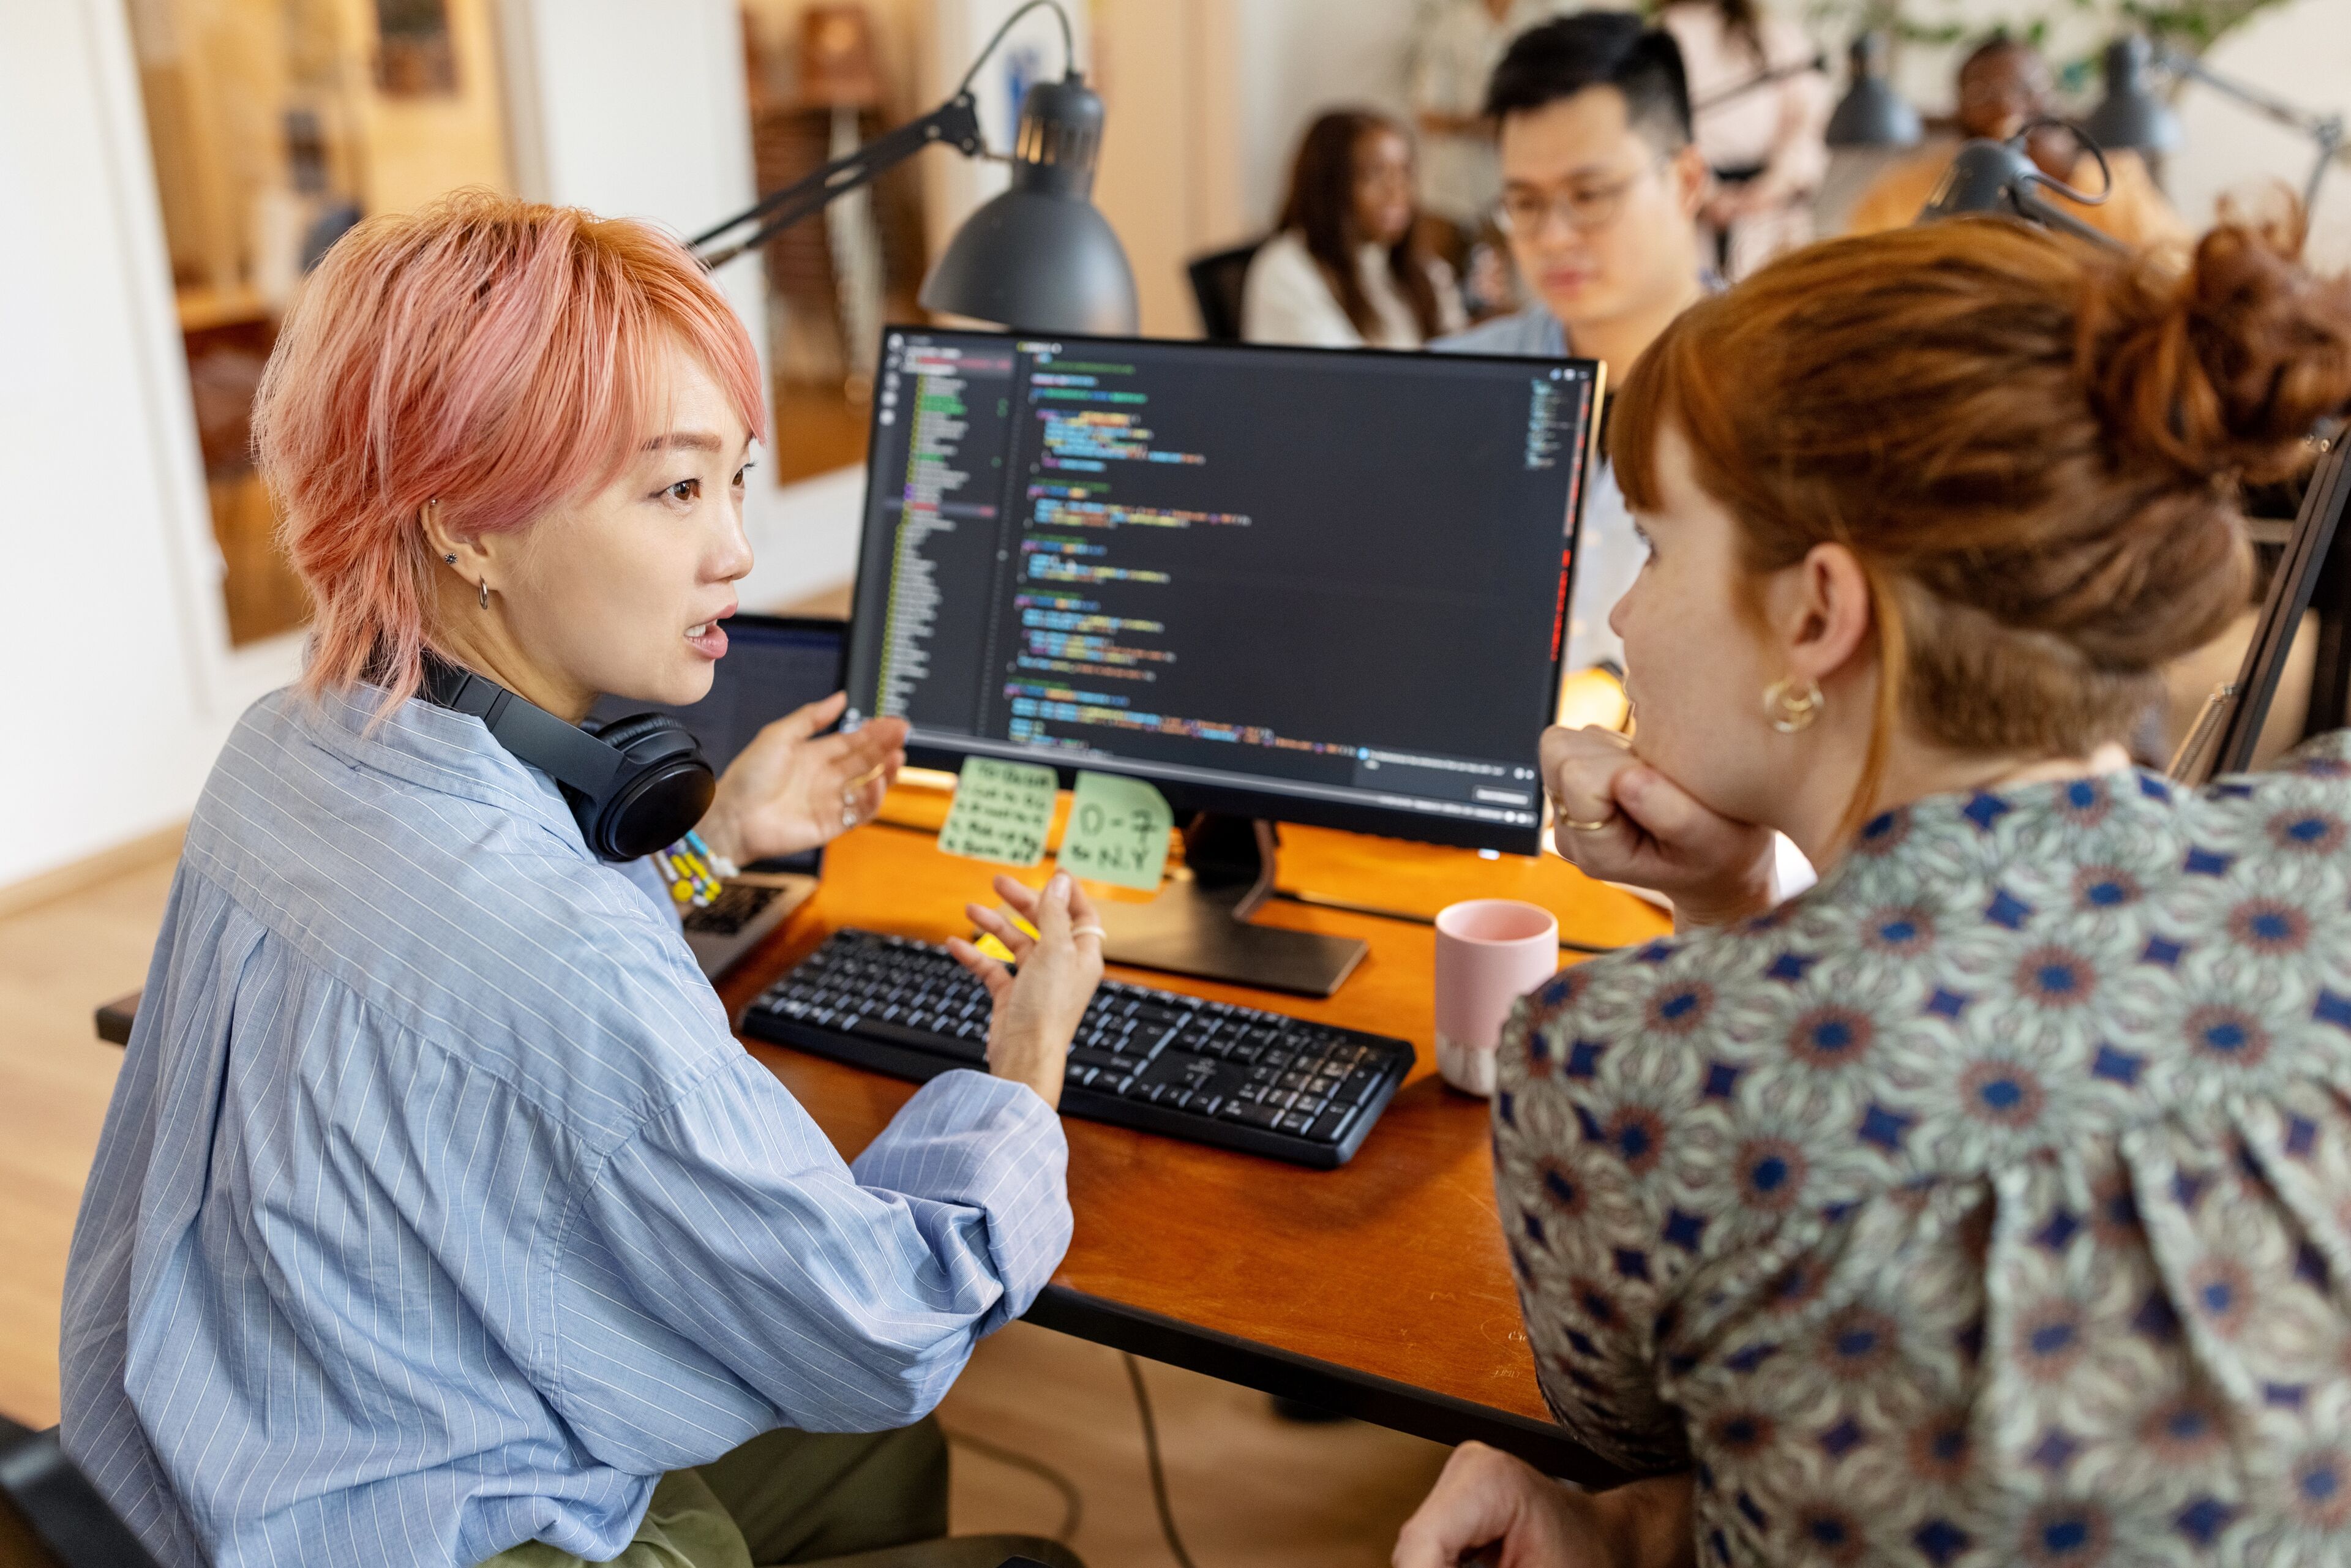 ImageA female developer with pink hair discussing code with a colleague in a busy office setting.